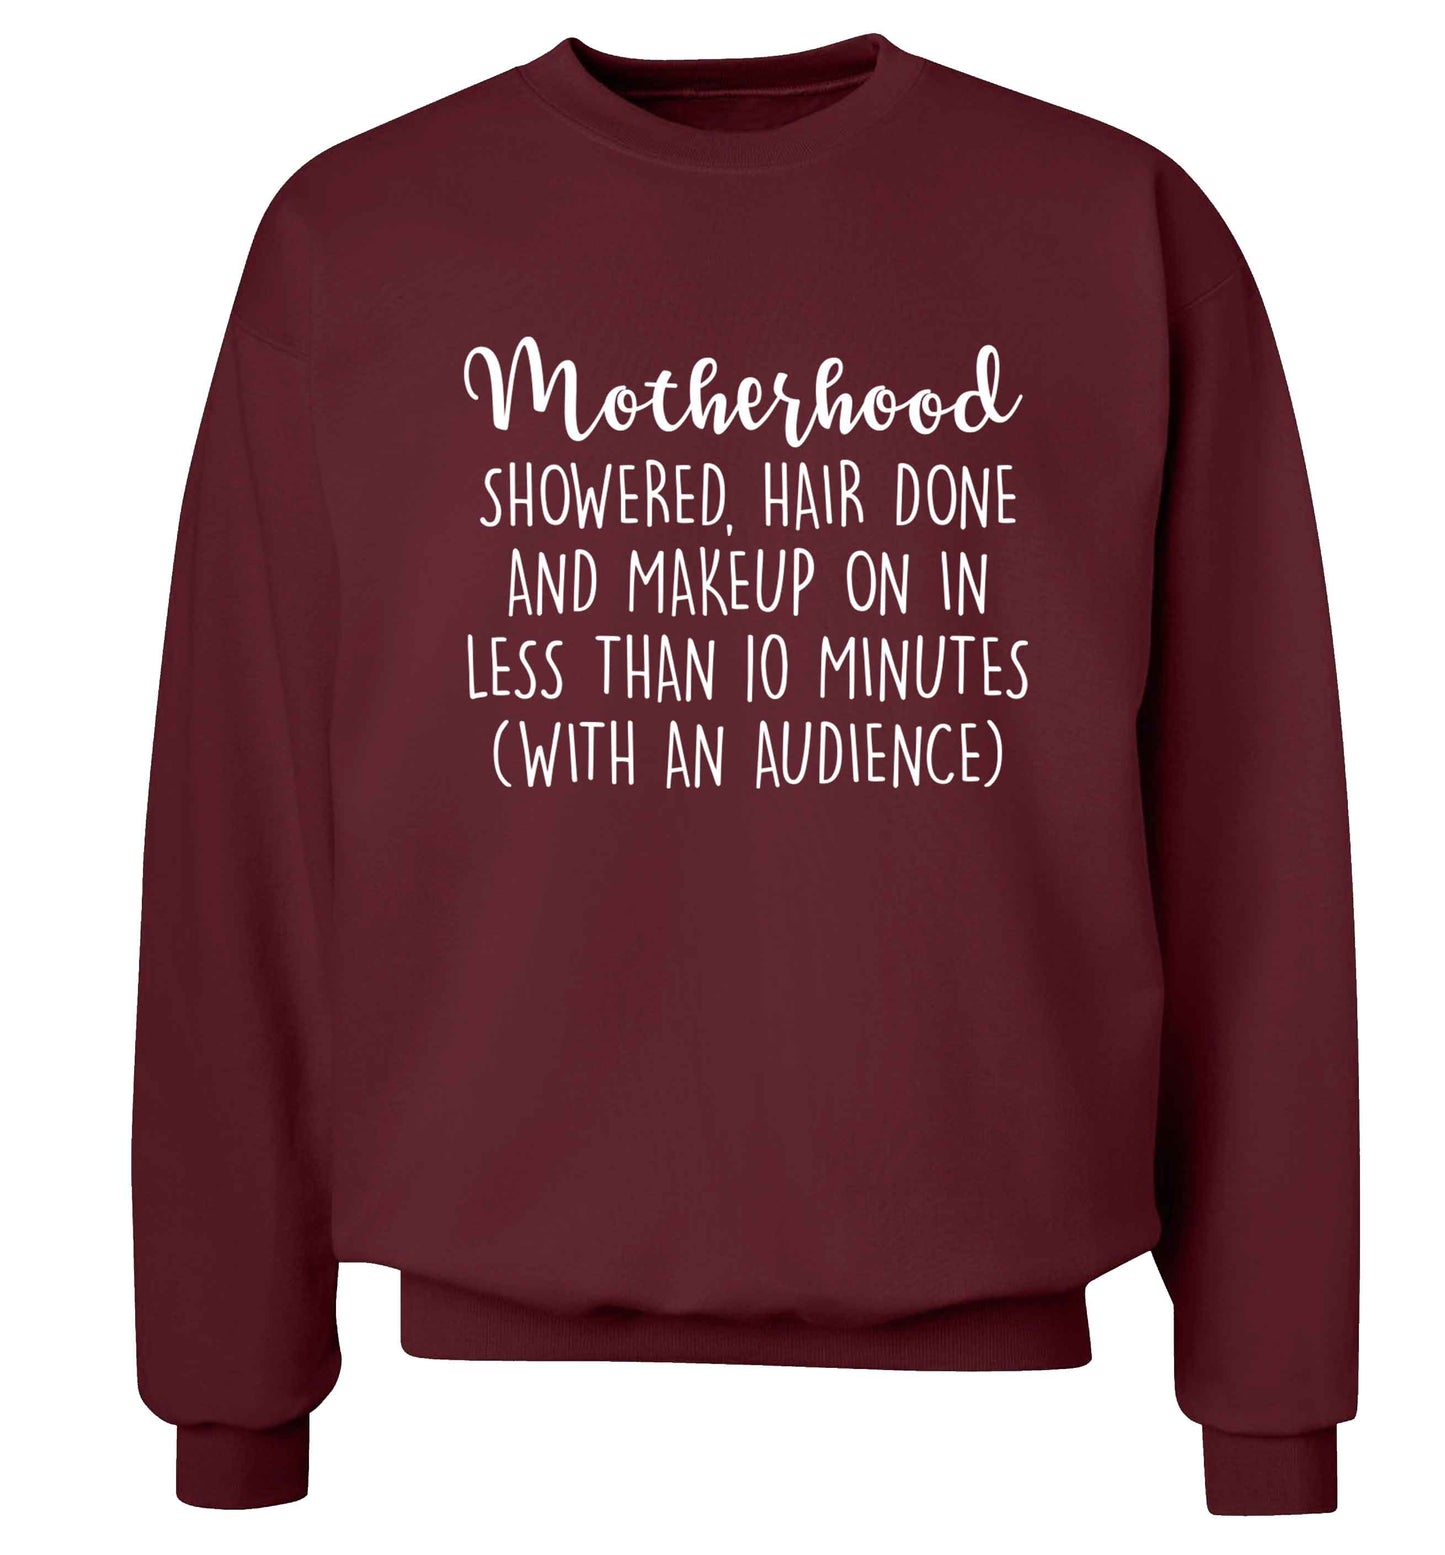 Motherhood, showered, hair done and makeup on Adult's unisex maroon Sweater 2XL